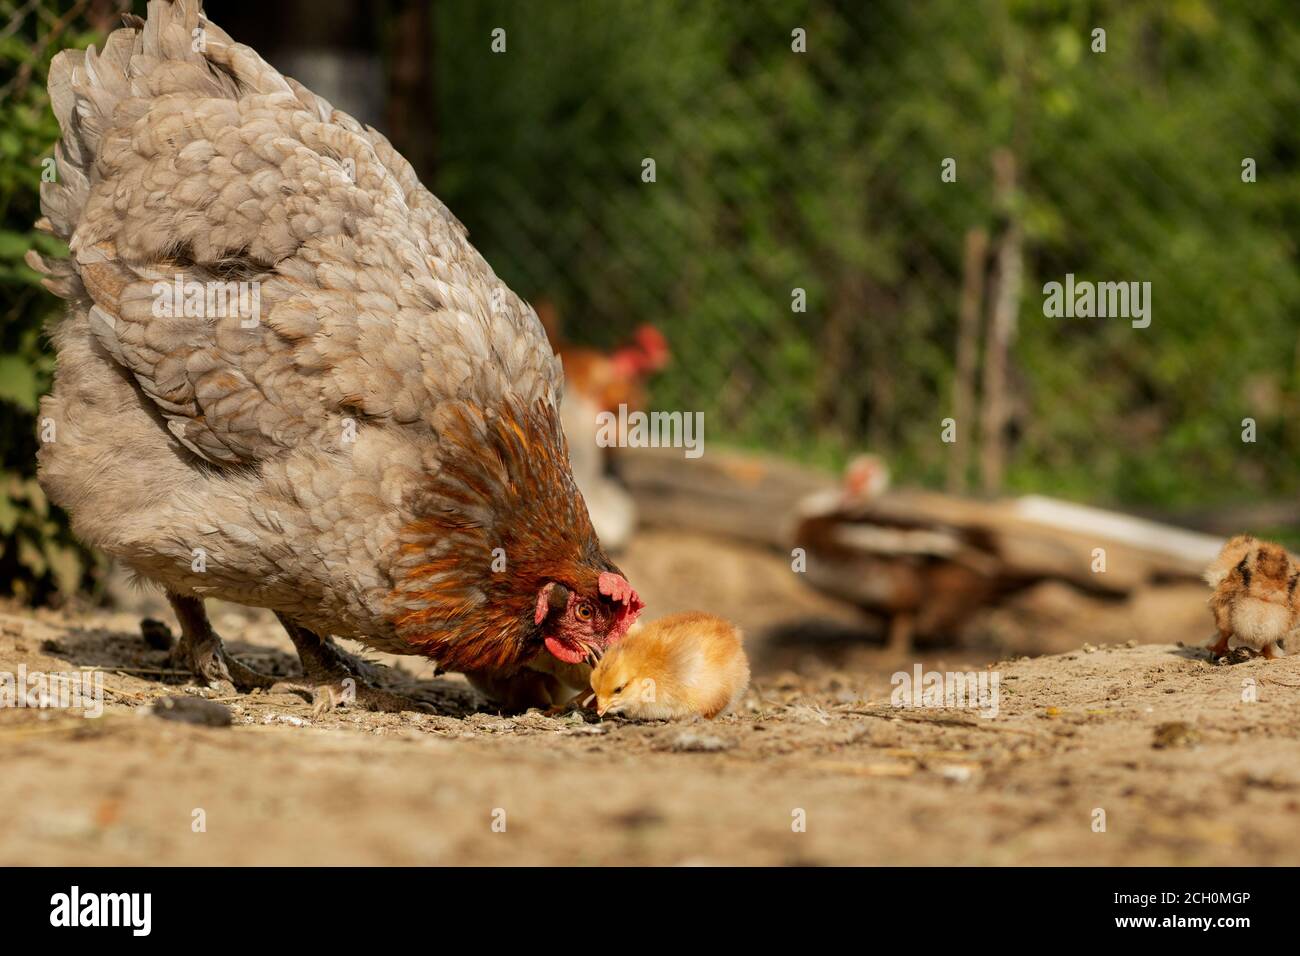 Mother Chicken High Resolution Stock Photography and Images   Alamy